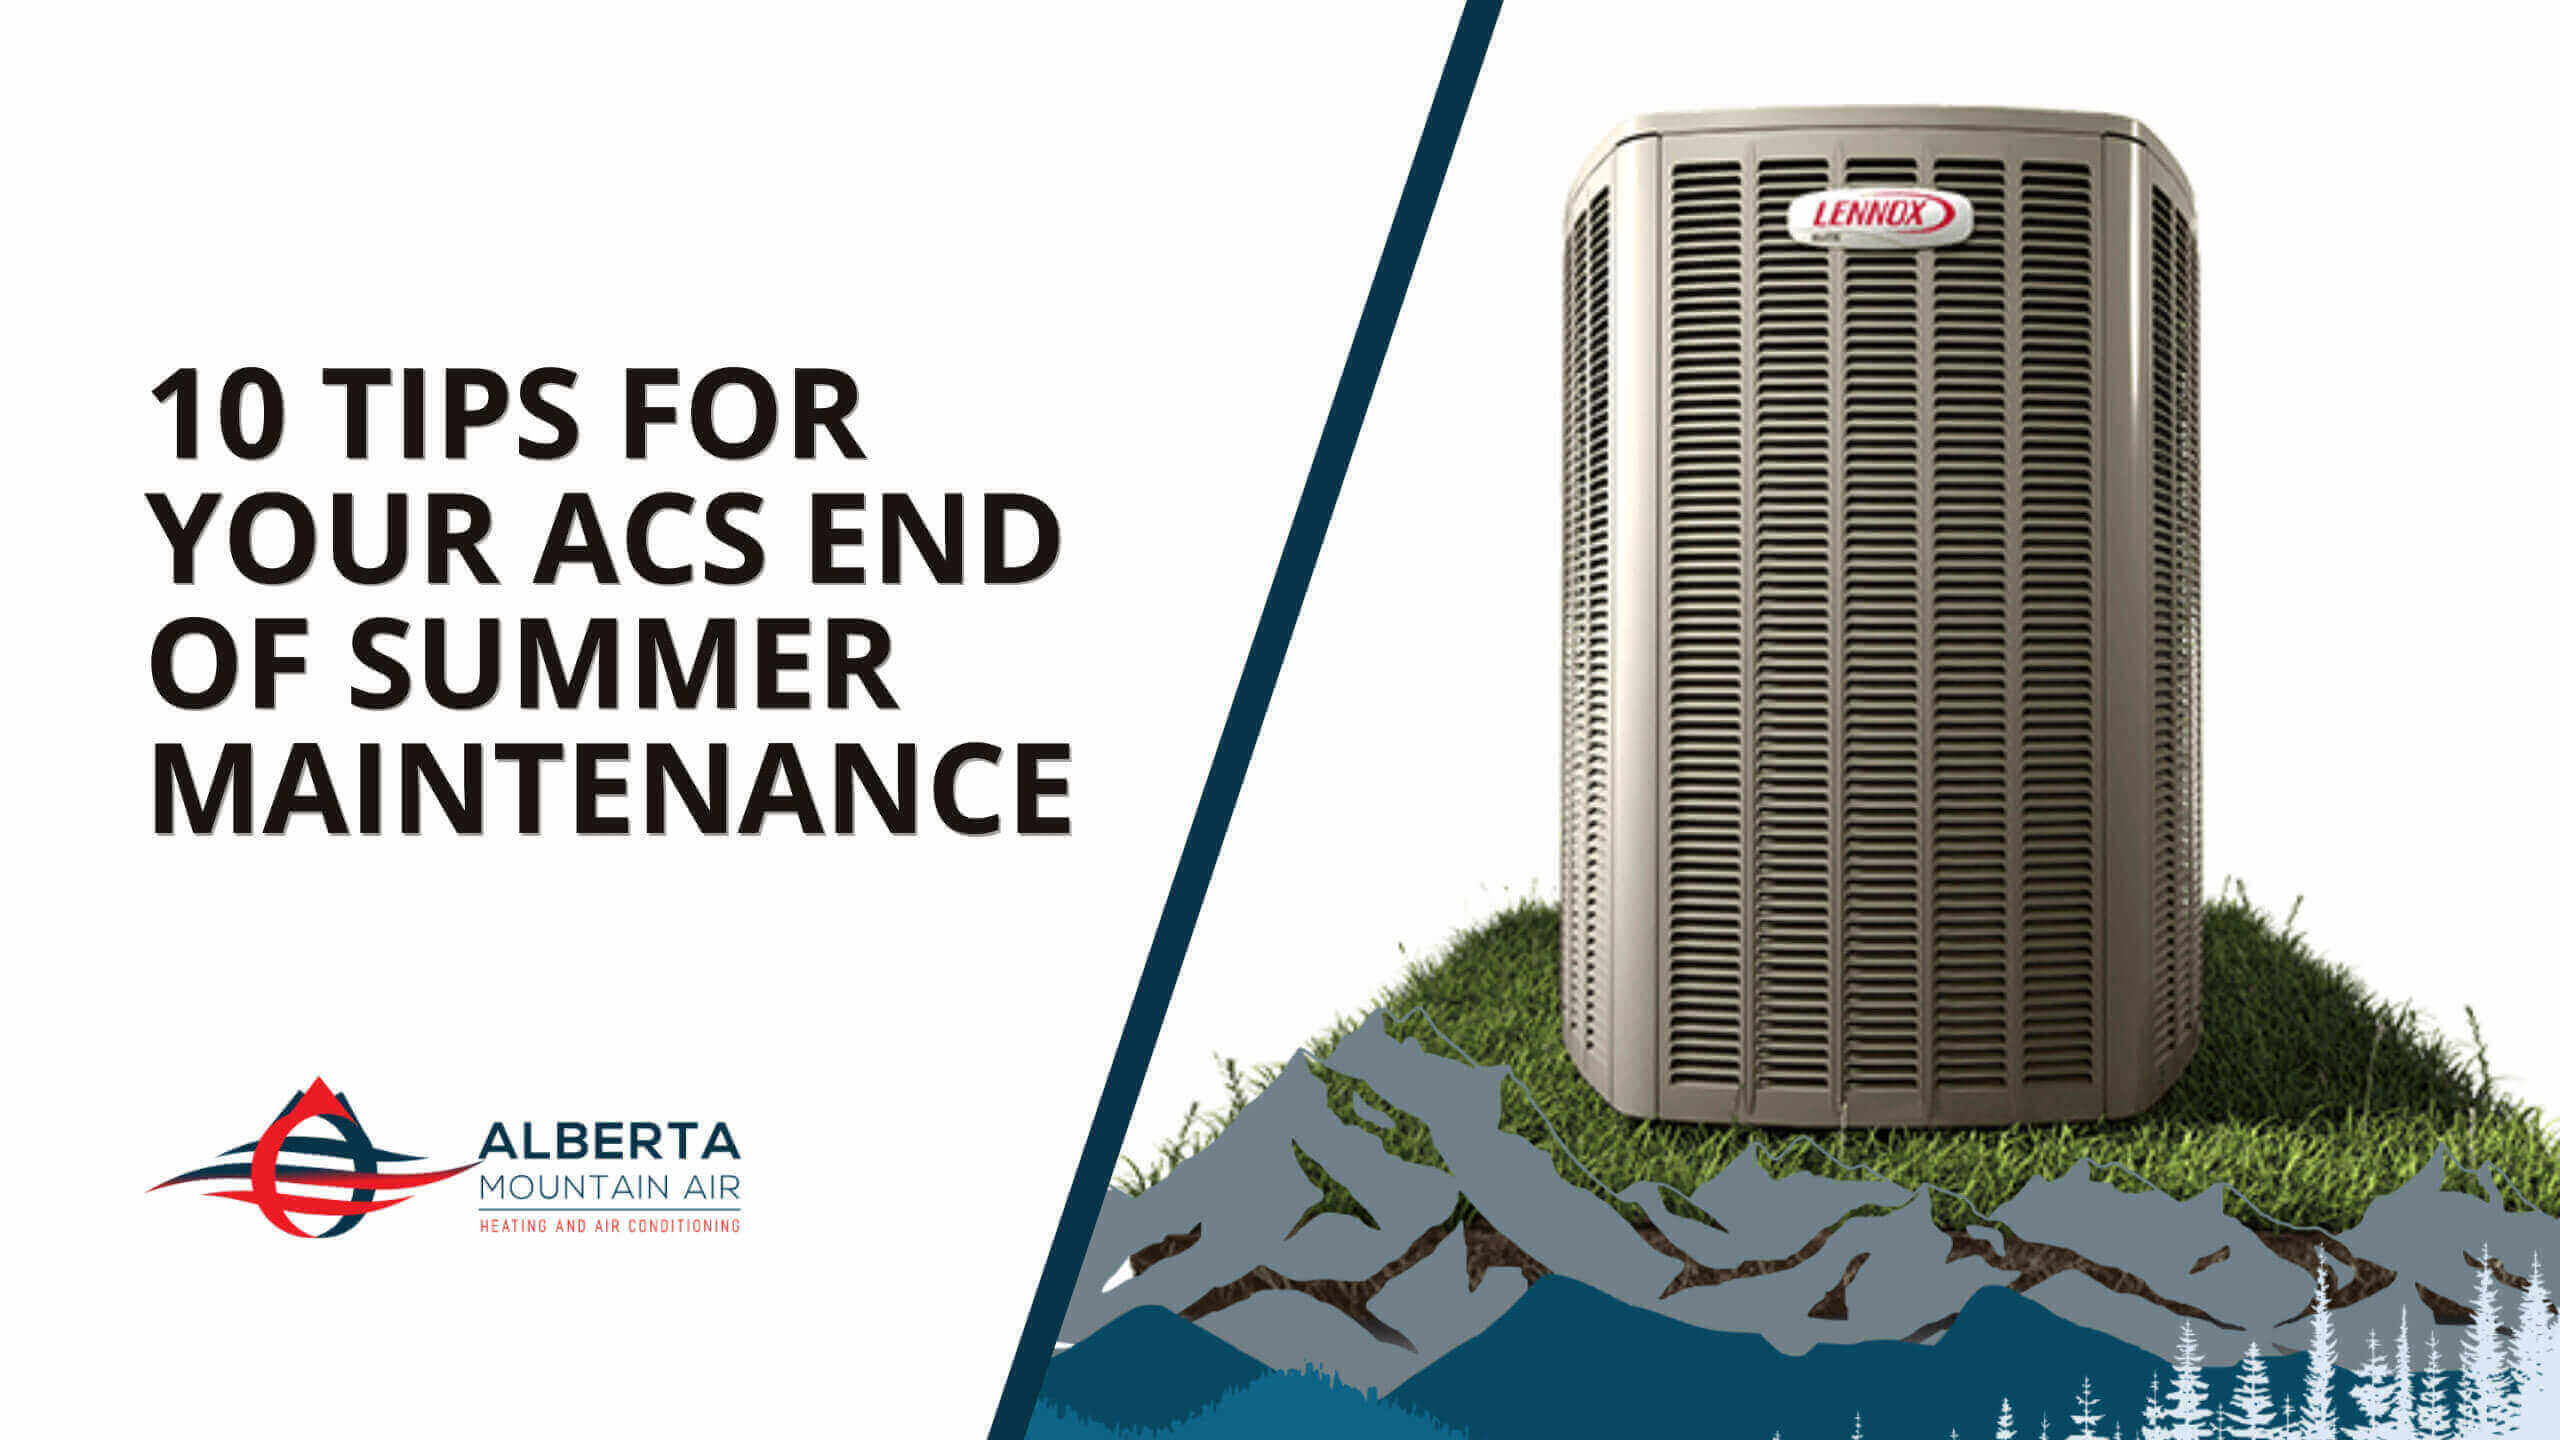 10 Tips for Your ACs End of Summer Maintenance